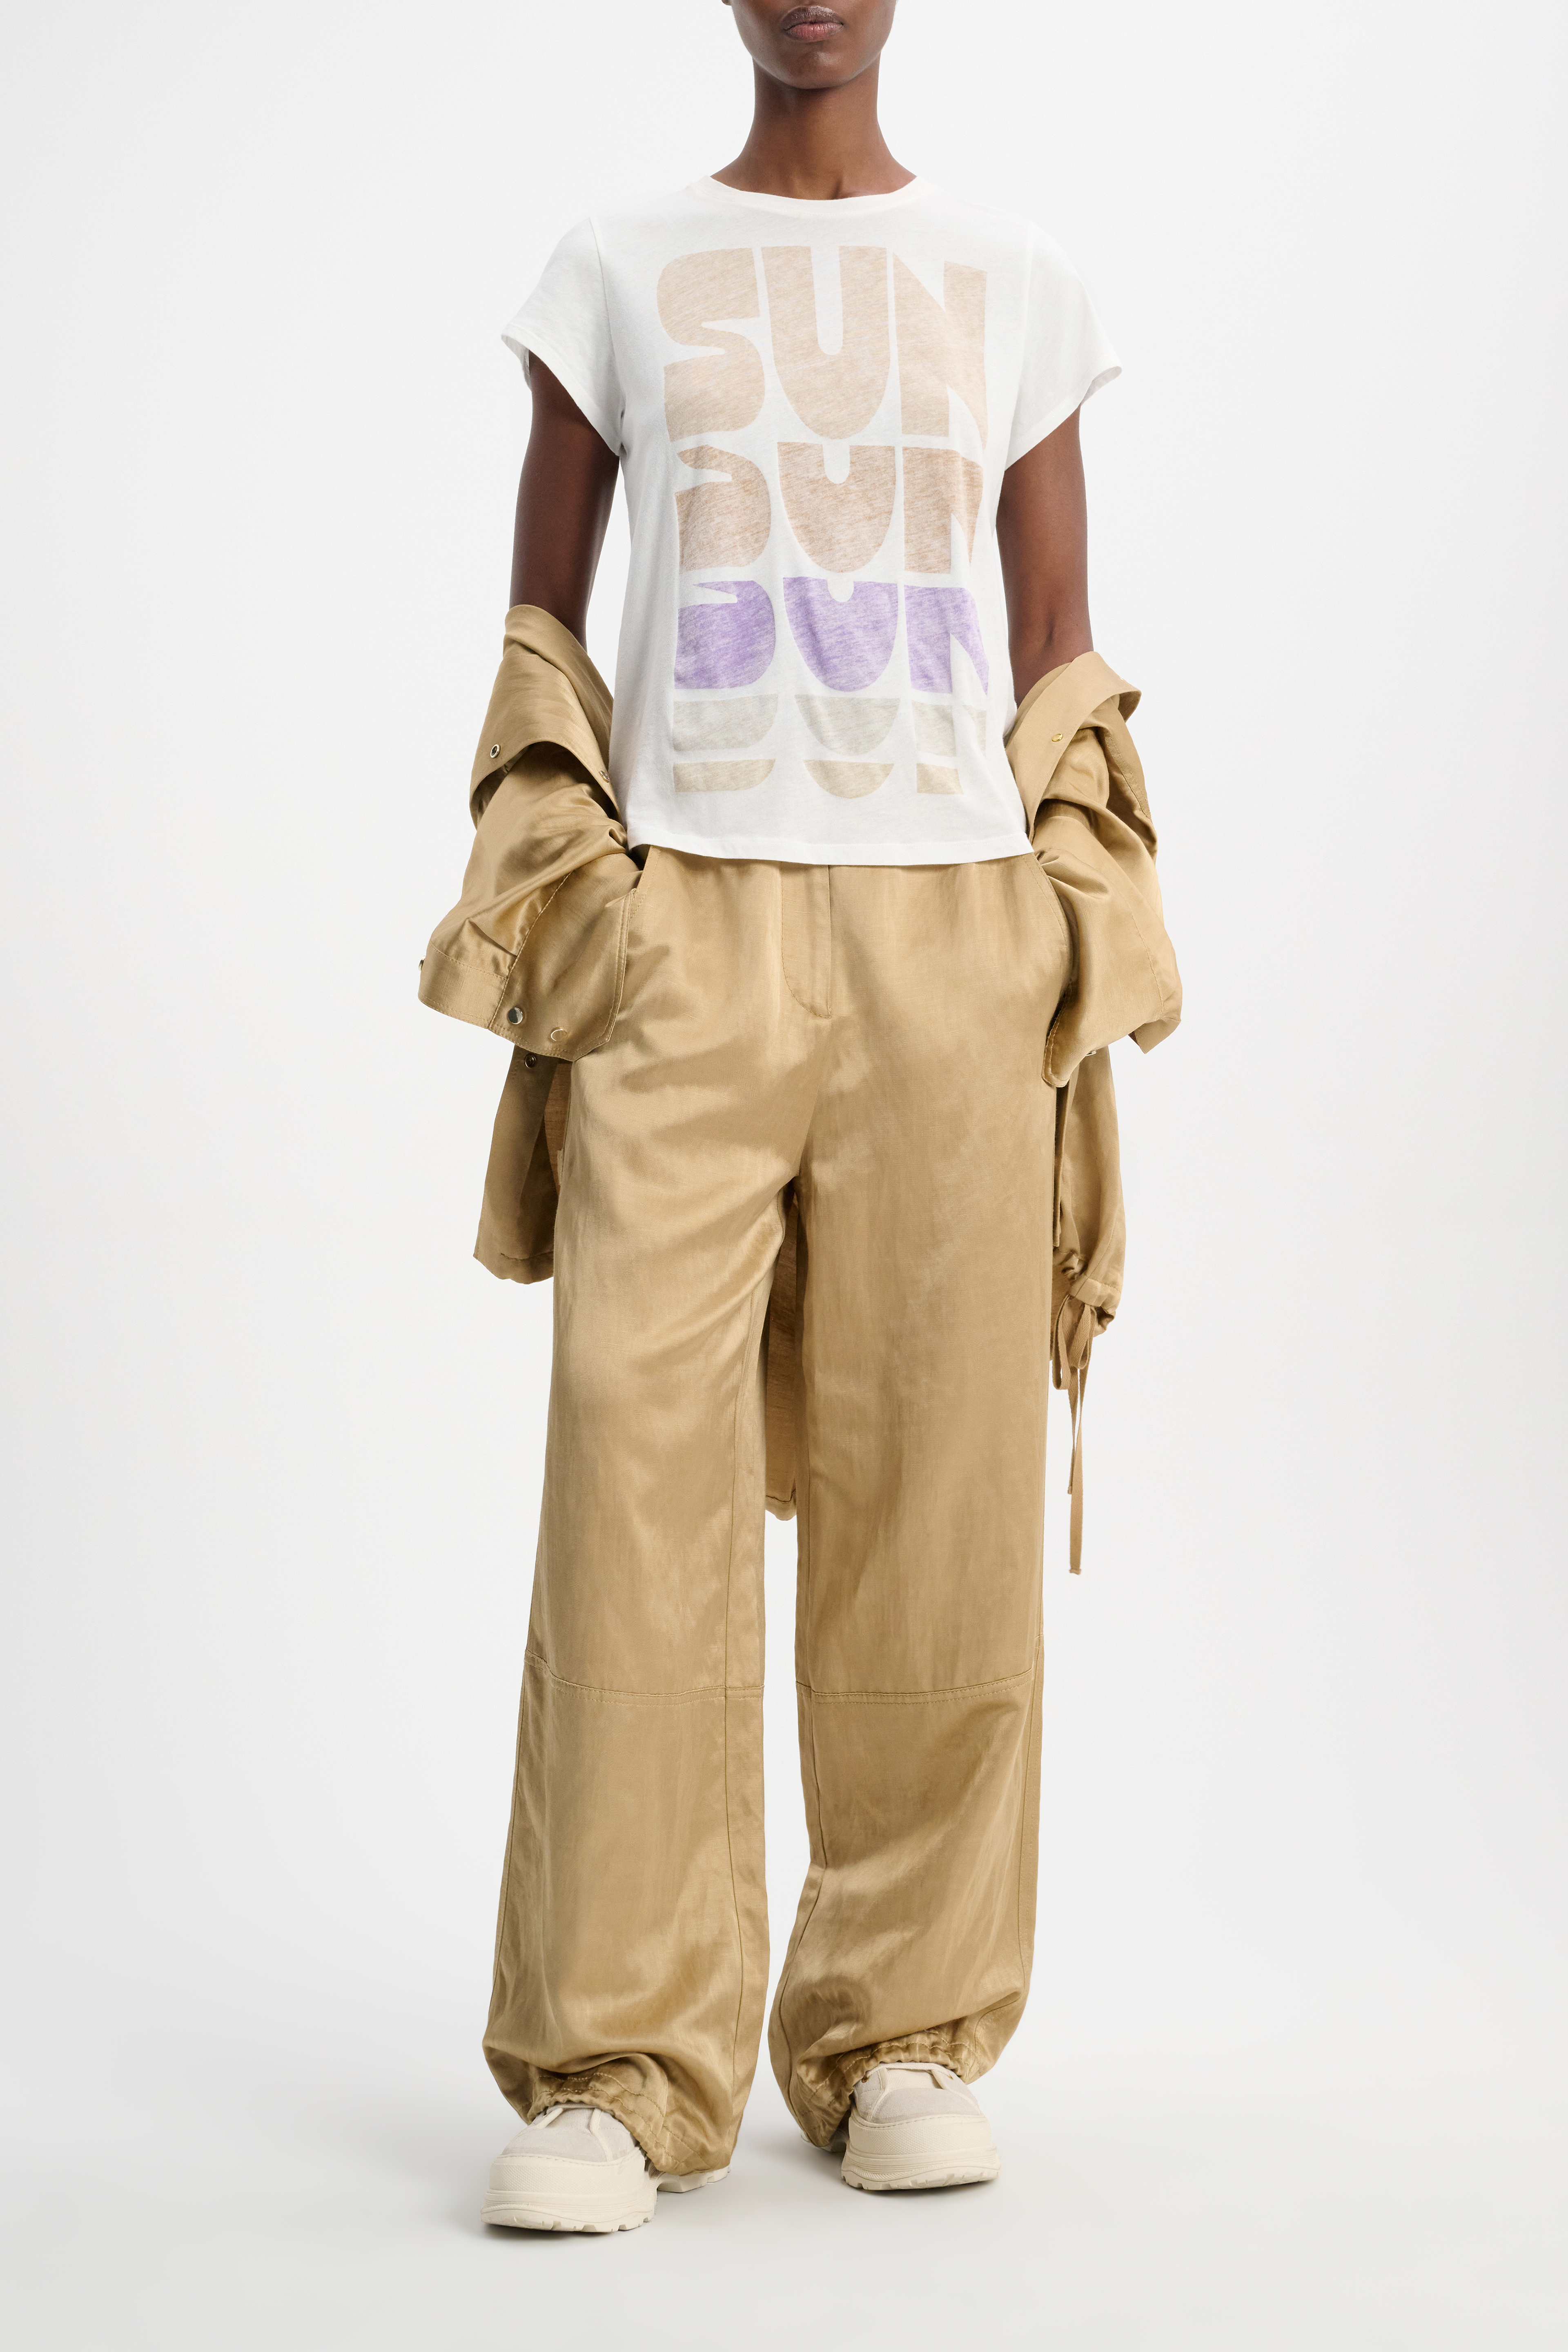 Dorothee Schumacher Cotton T-shirt with lettered SUN